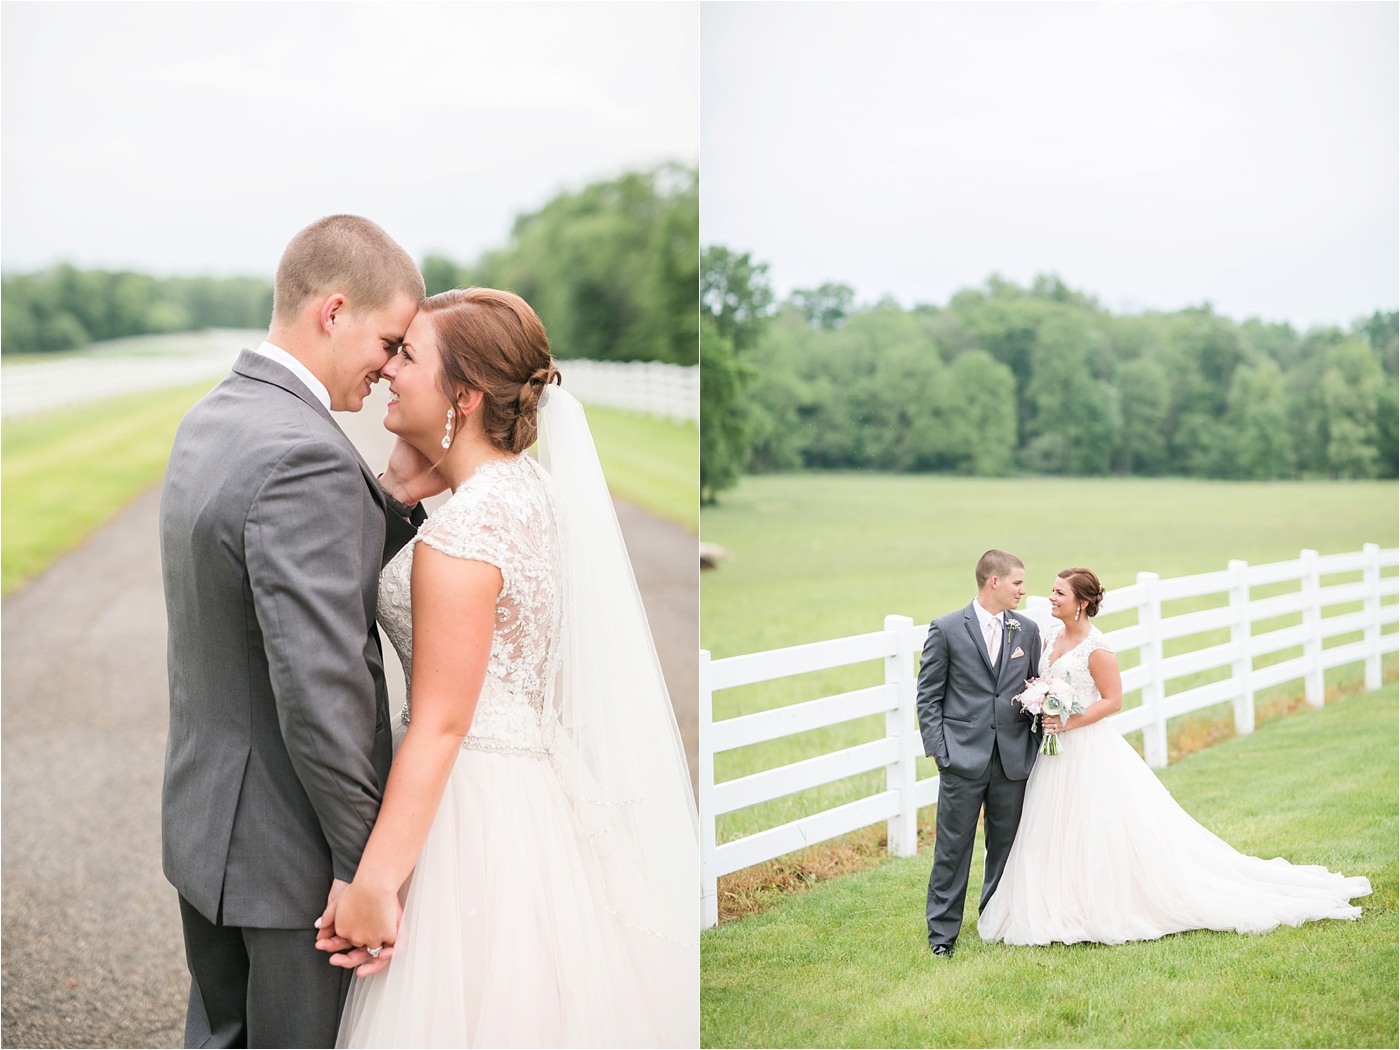 A Blush Outdoor wedding at Irongate Equestrian | KariMe Photography_0133